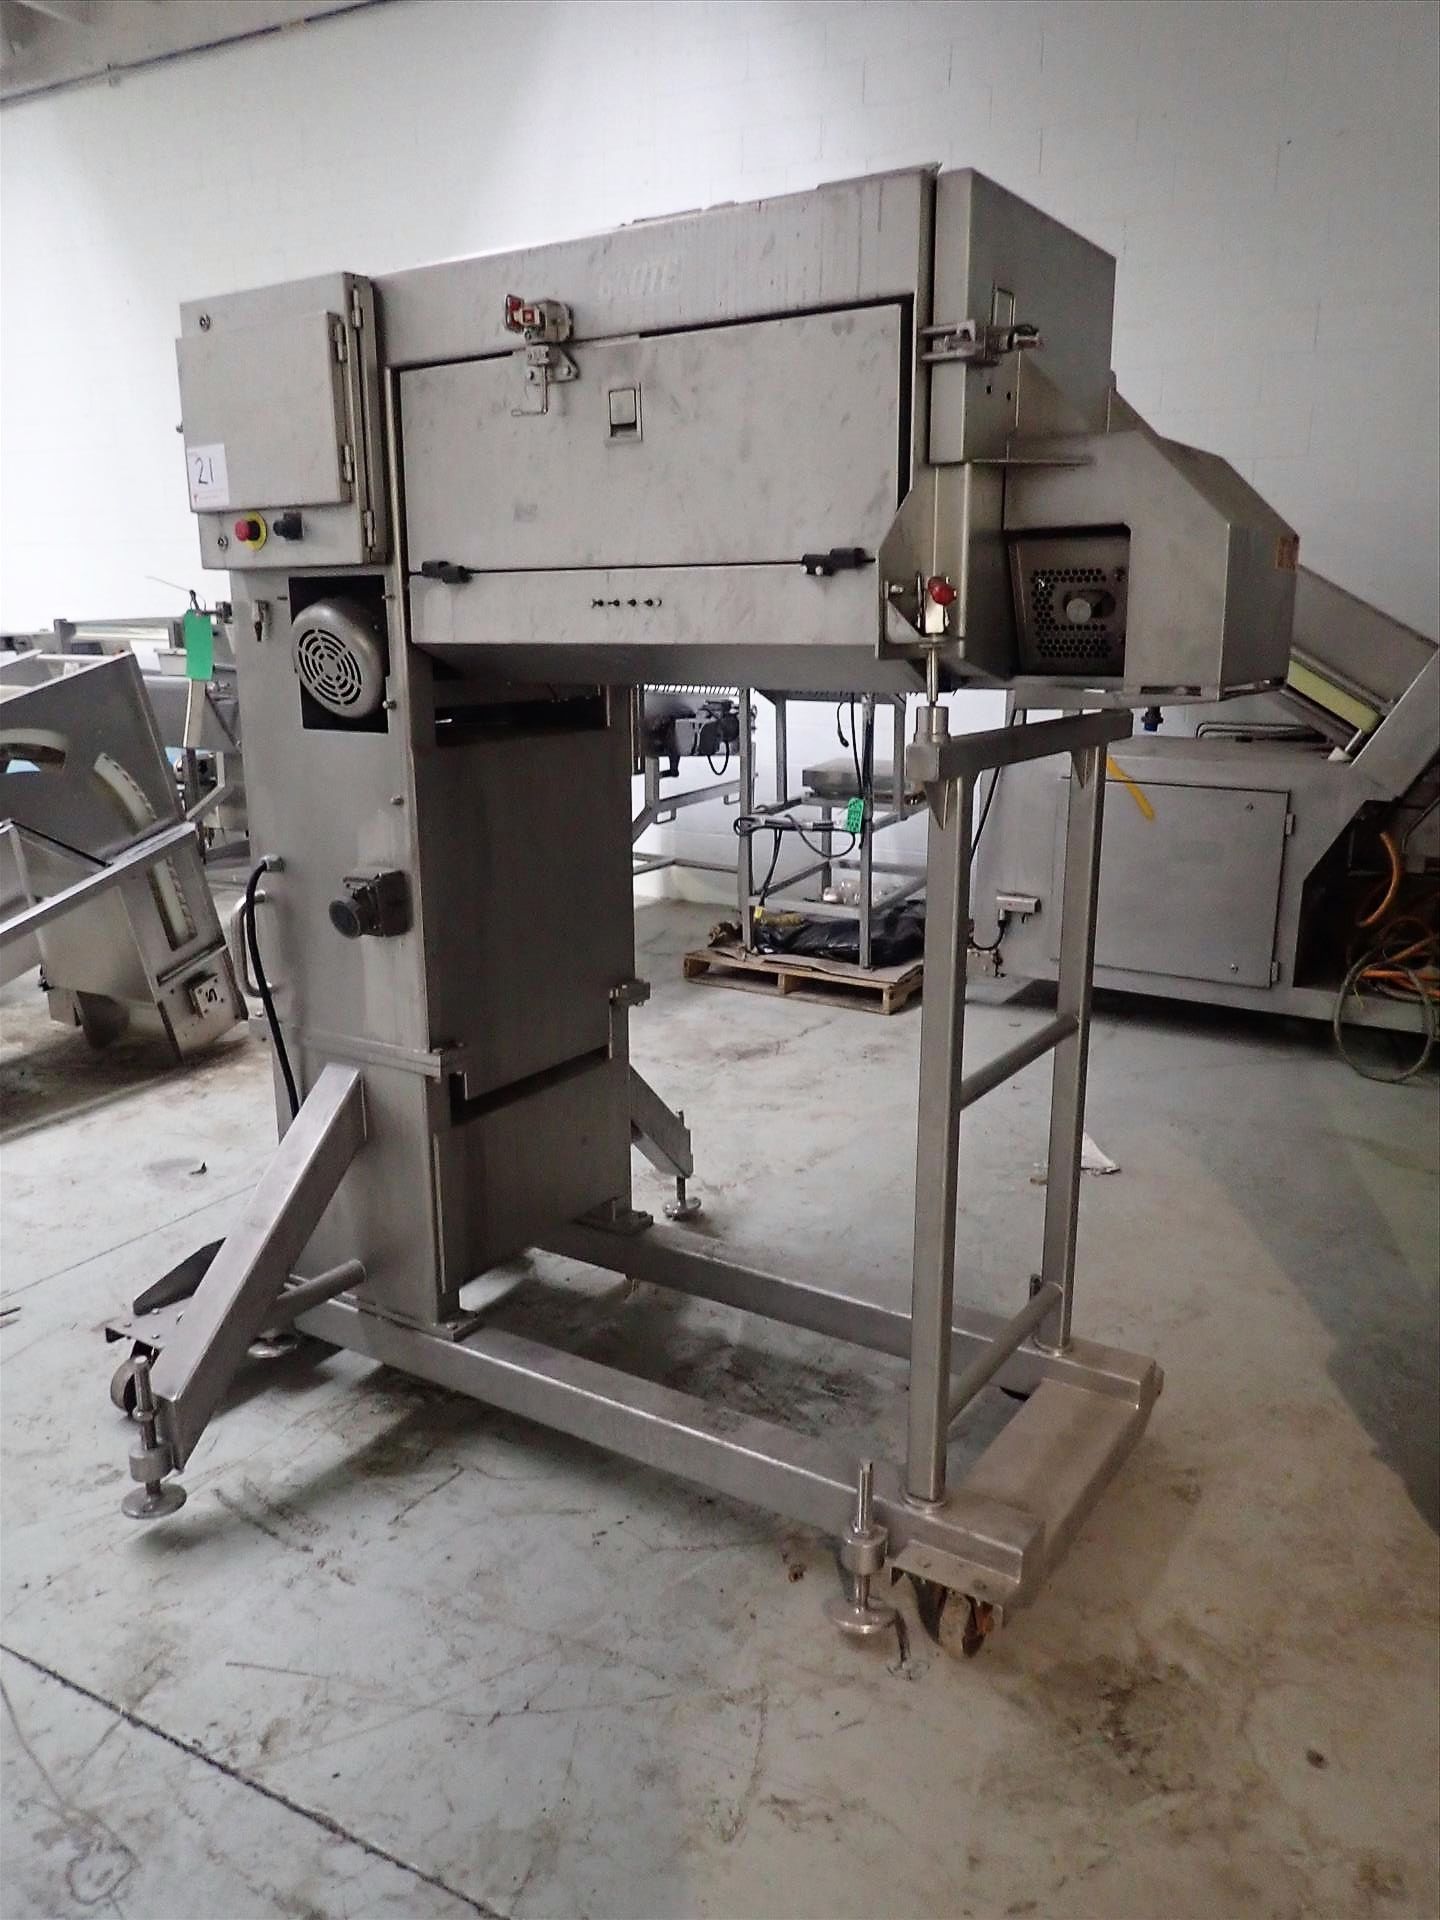 Grote slicer/applicator, s/s, mod. S/A-530-SD, ser. no. 1150474 w/ PanelView C1000 touch-screen - Image 2 of 8